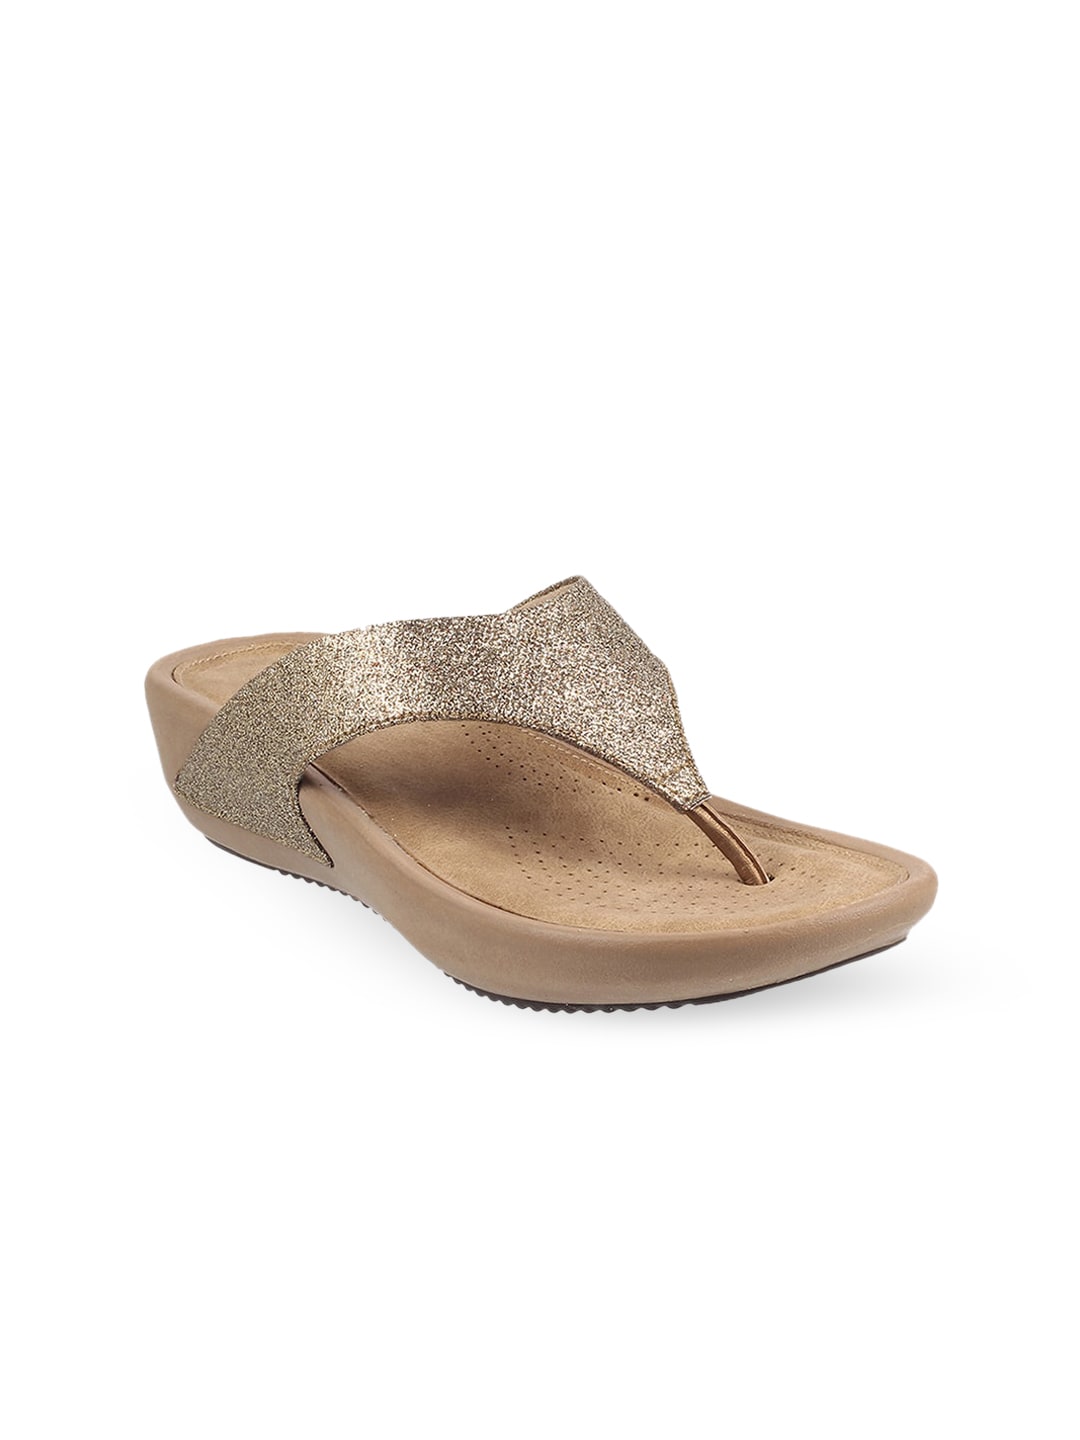 Mochi Women Embellished T-Strap Flats Price in India